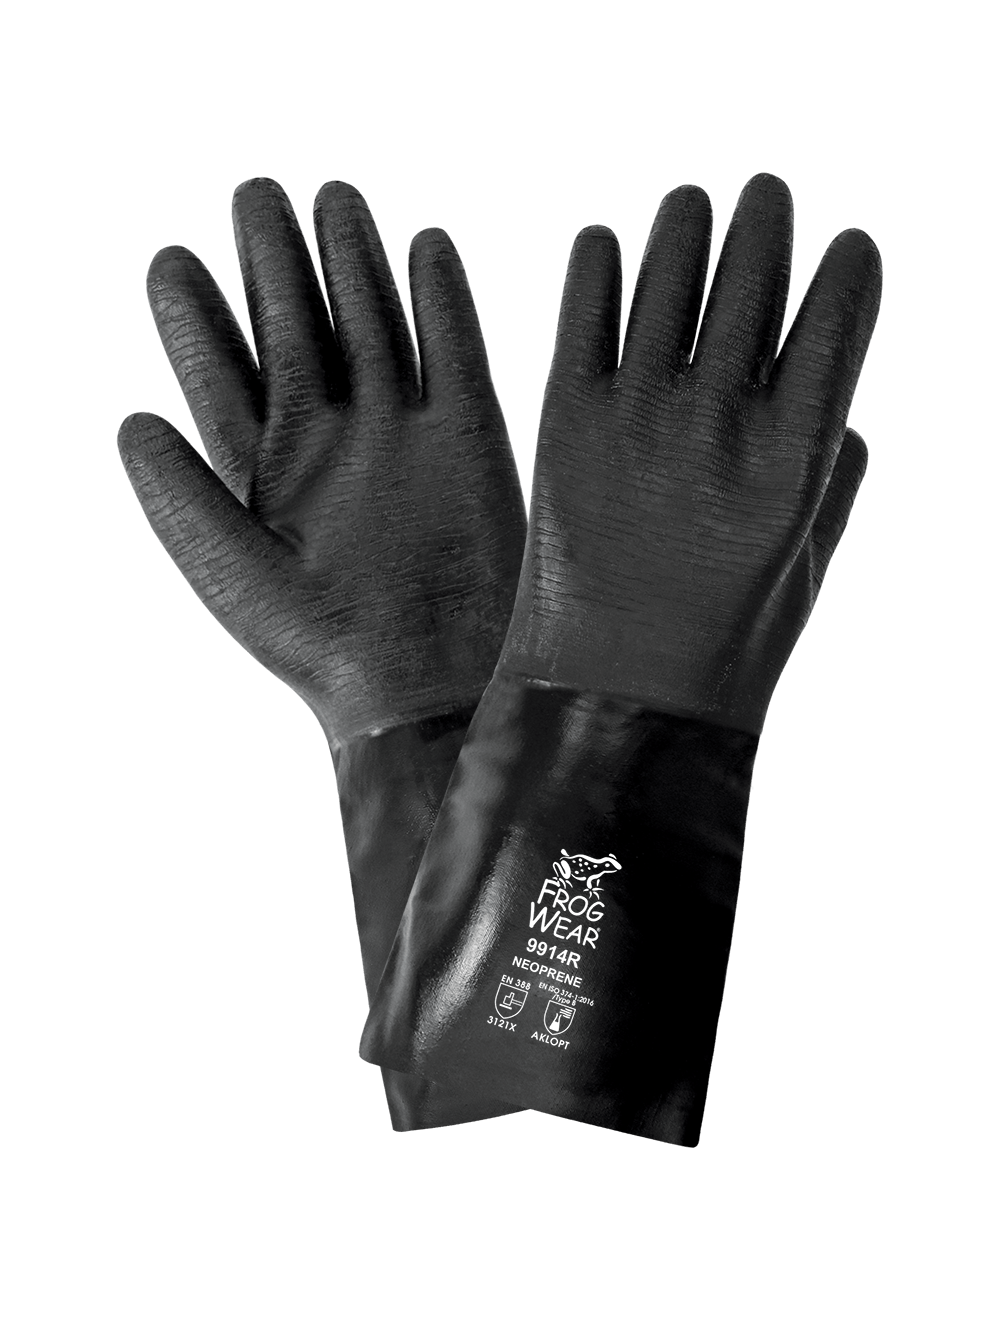 Global Glove and Safety Hand Protection, Eye Protection, Cooling  Protection, Heat Stress, Cut Resistant Protection FrogWear® Premium Neoprene  Rough Etched Finish 14-Inch Chemical Handling Gloves - 9914R